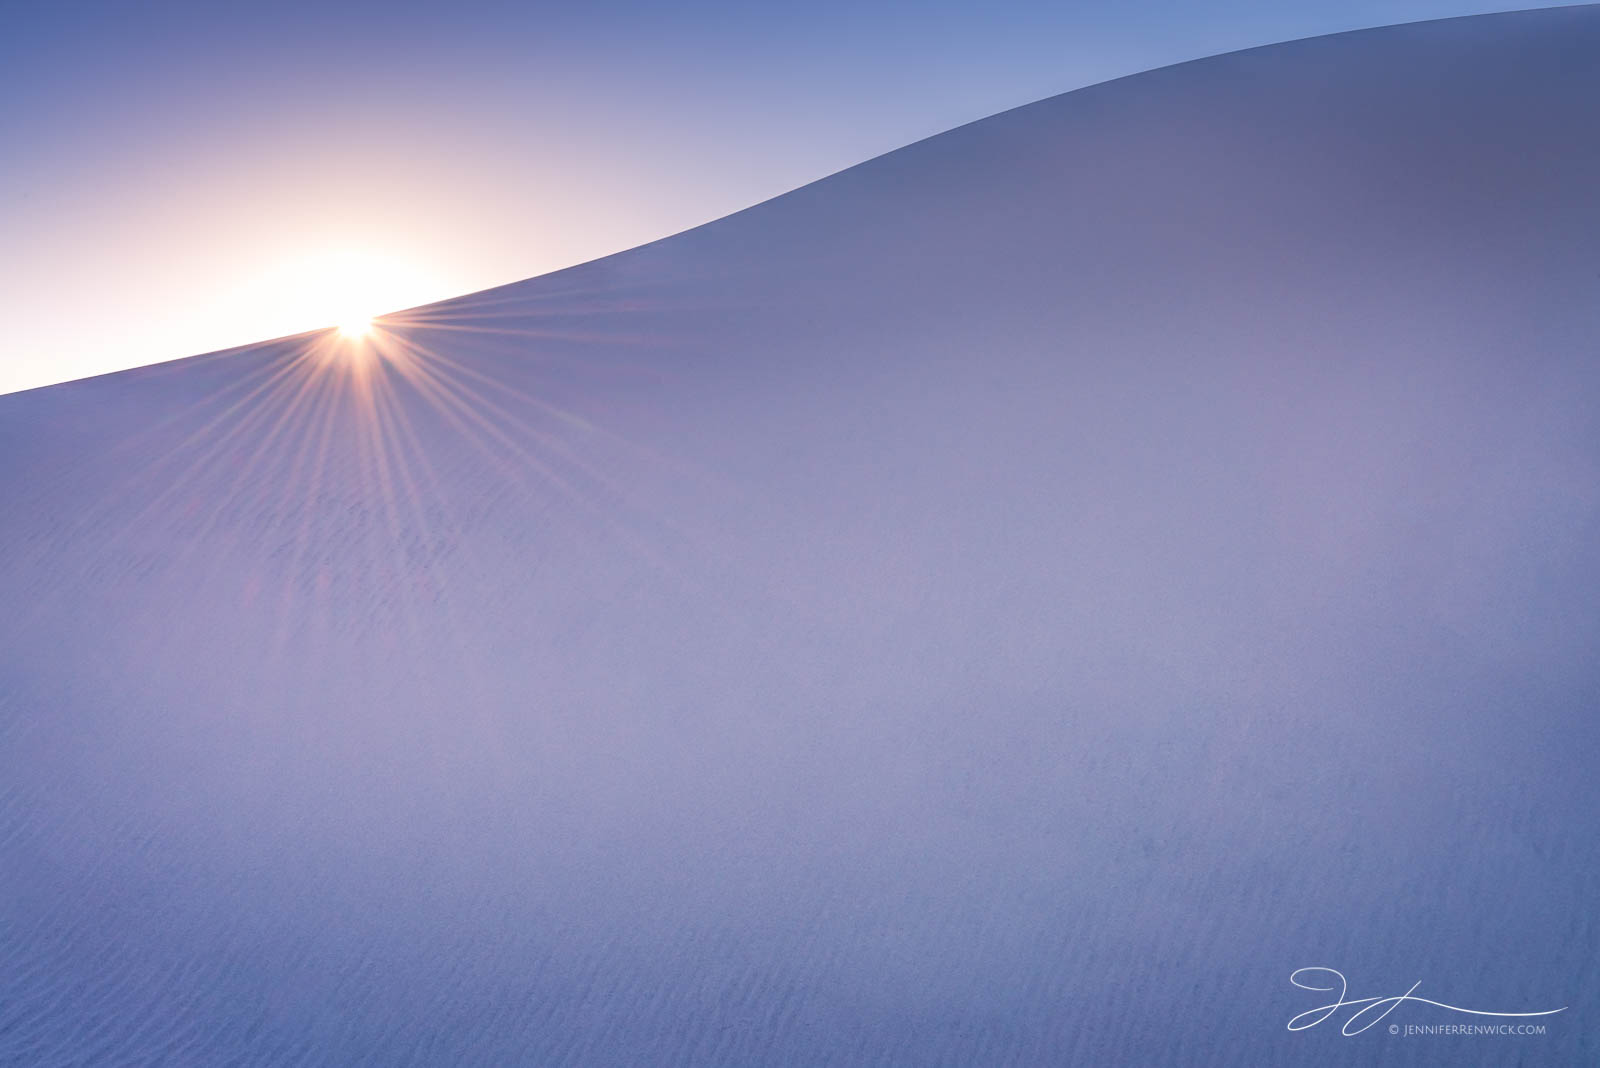 The sun sets behind a dune, reminding us a new day will come tomorrow.